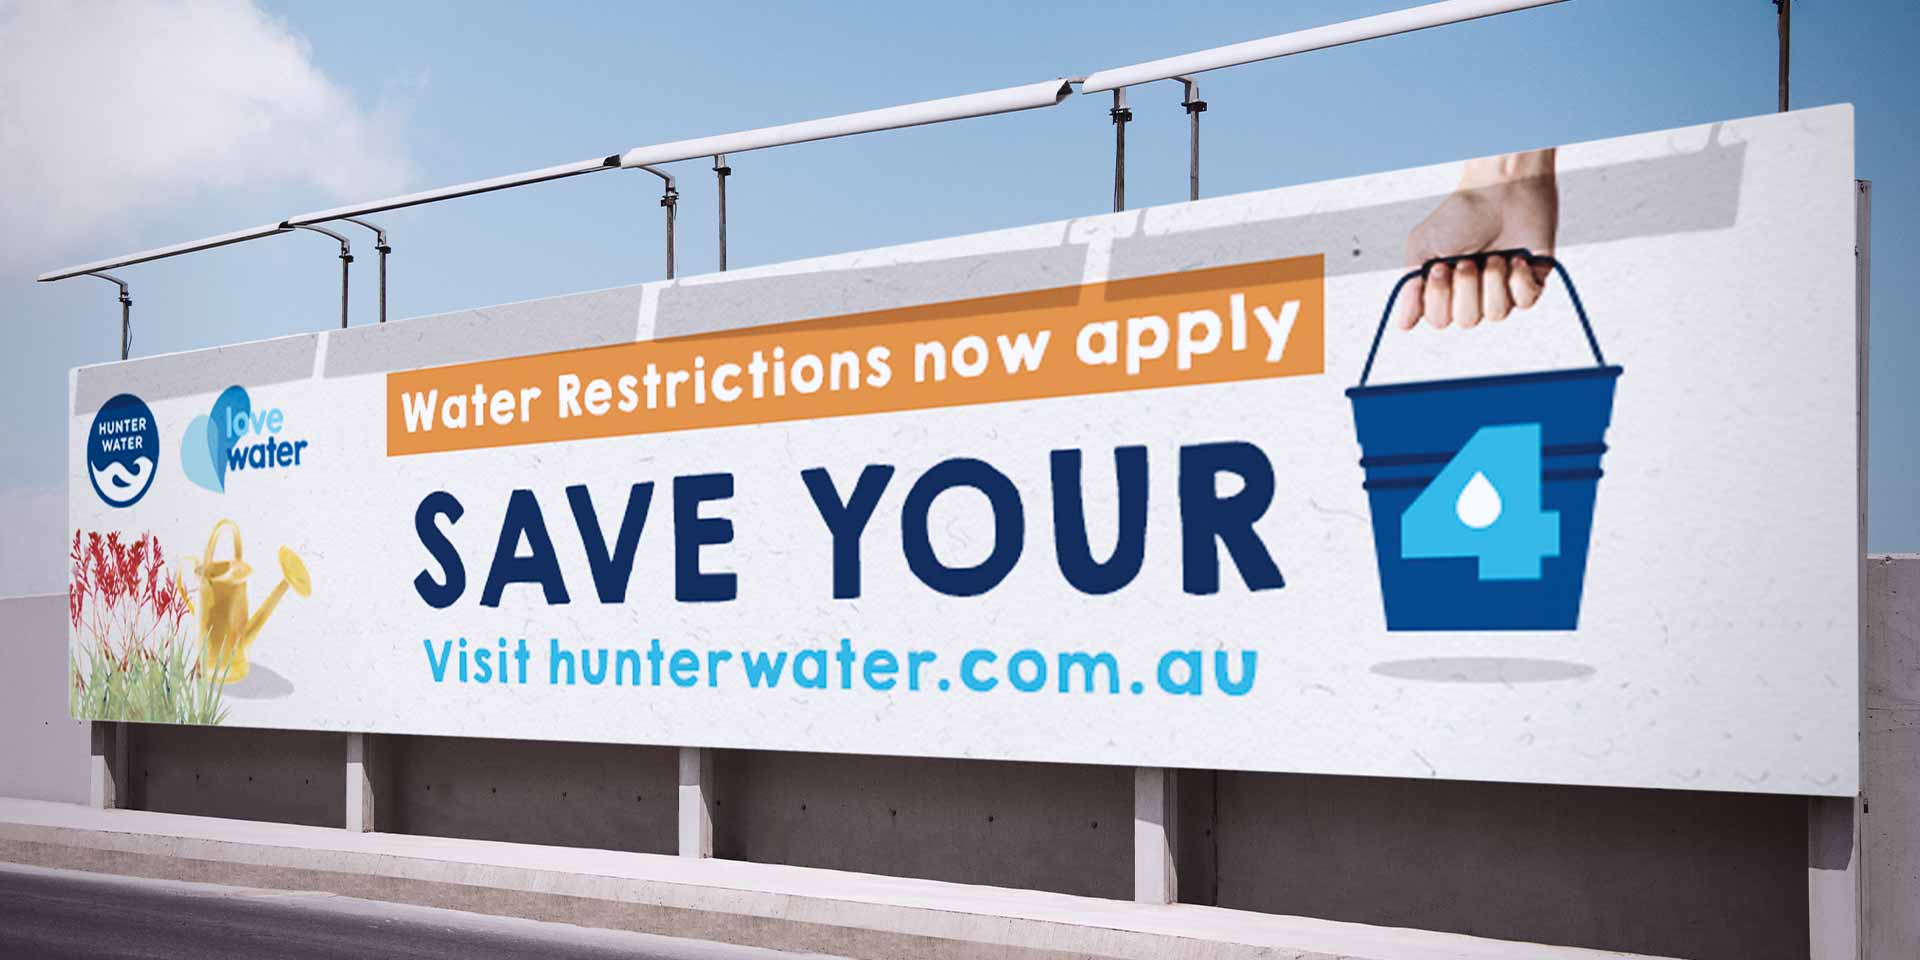 Hunter Water Save your 4 Campaign